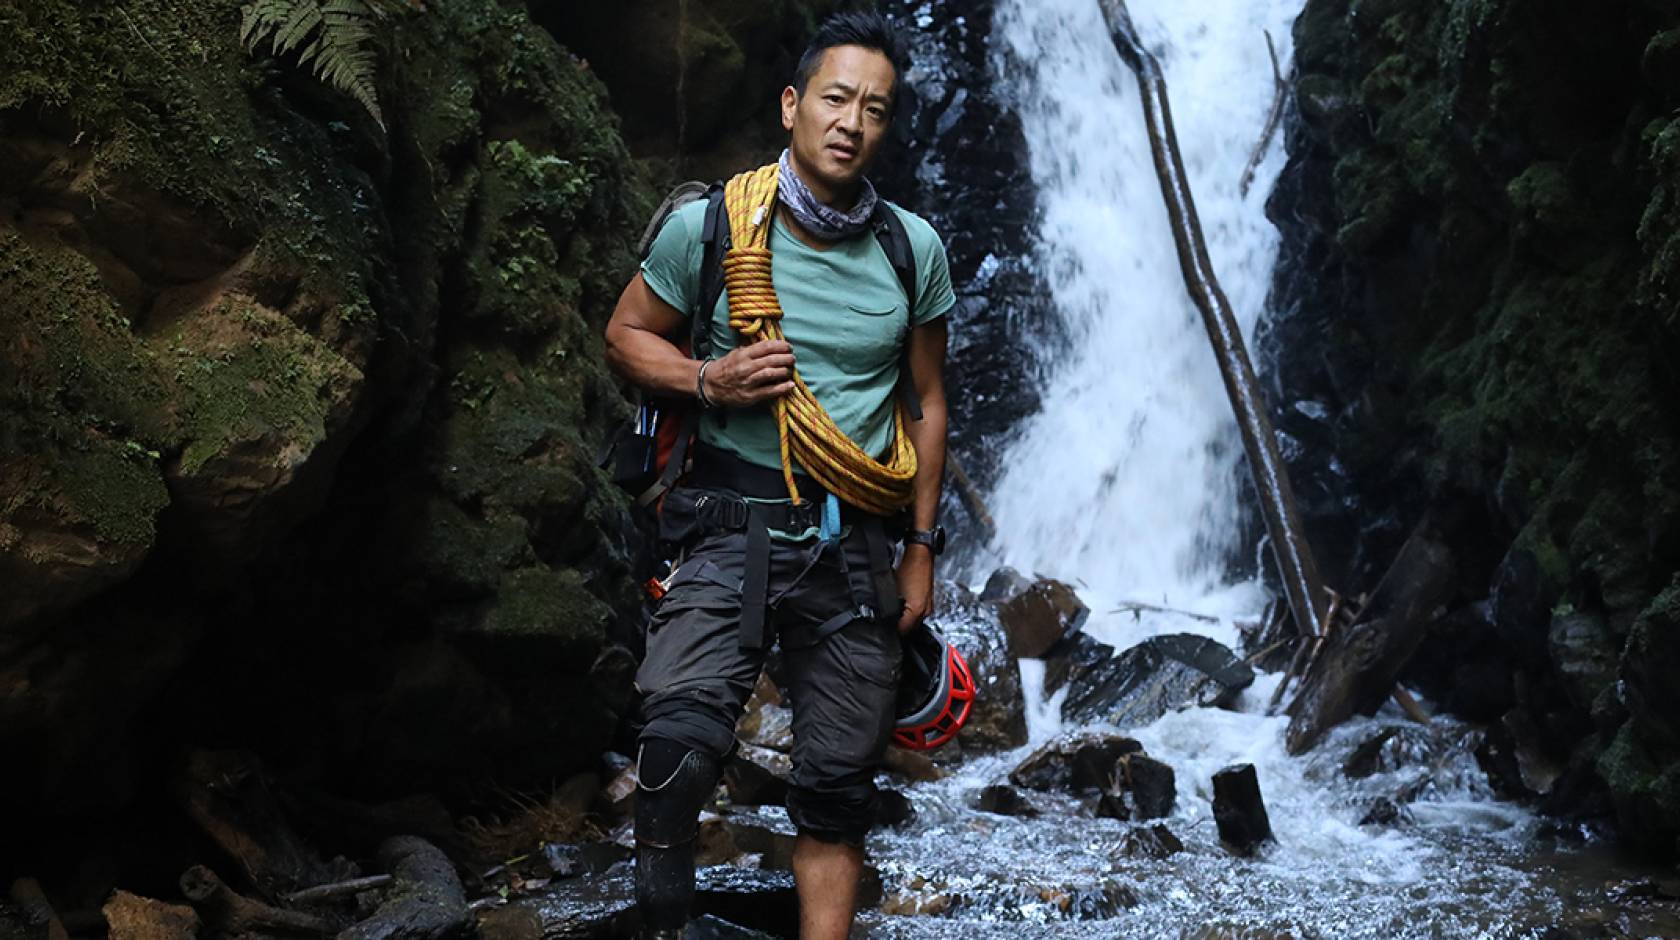 Albert Lin in outdoorsy gear stands in front of a waterfall